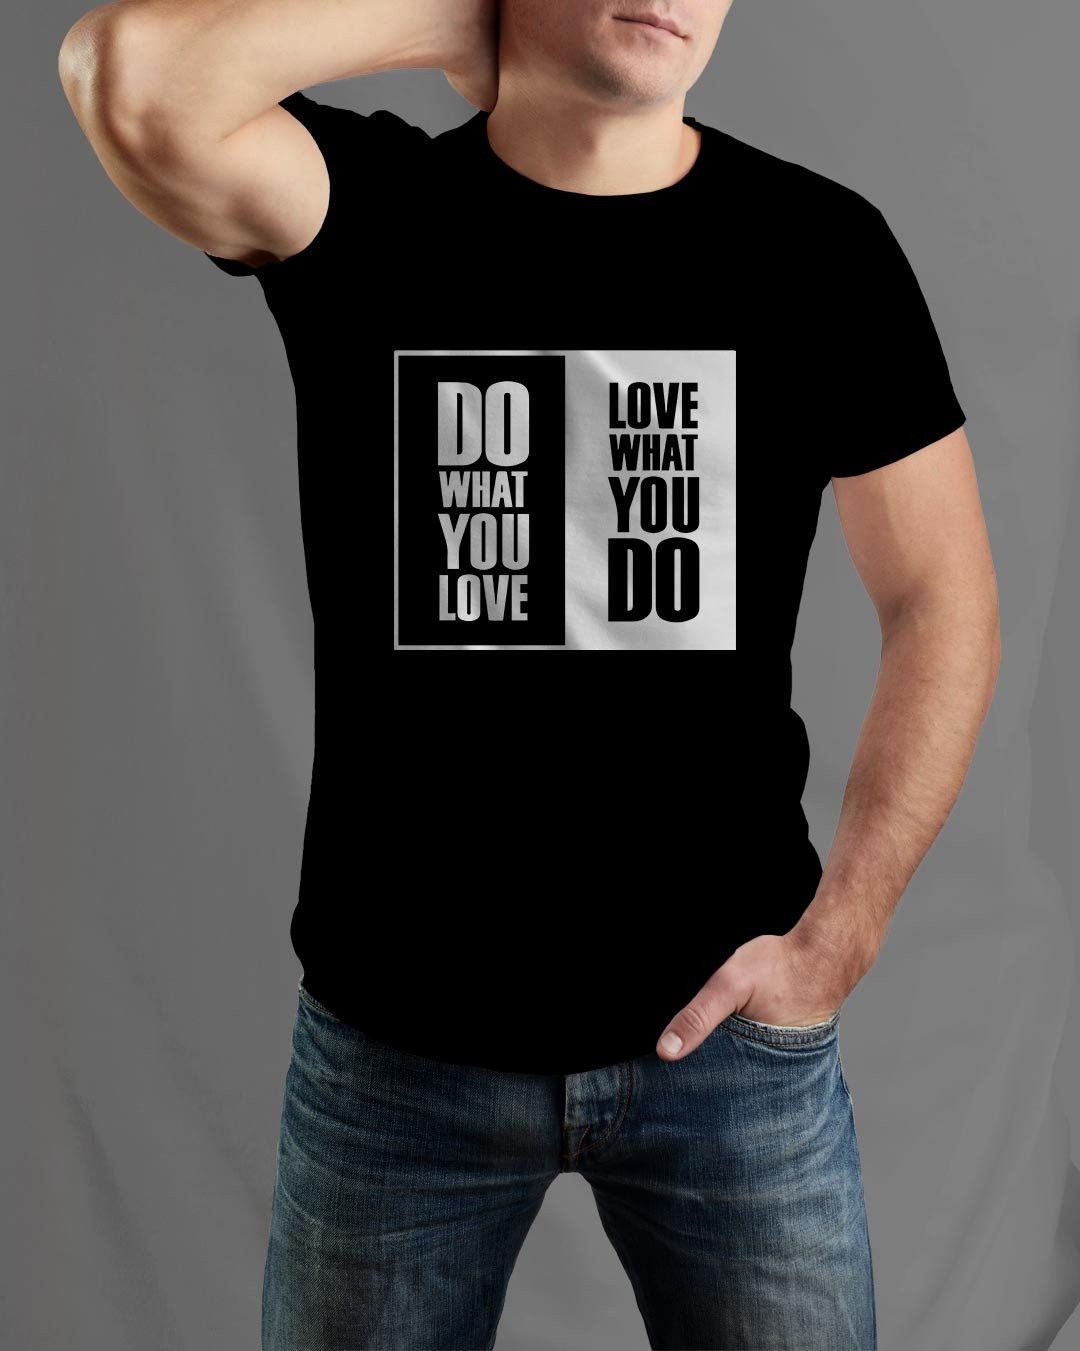 Do What You Love and Love What You Do Printed T-Shirts